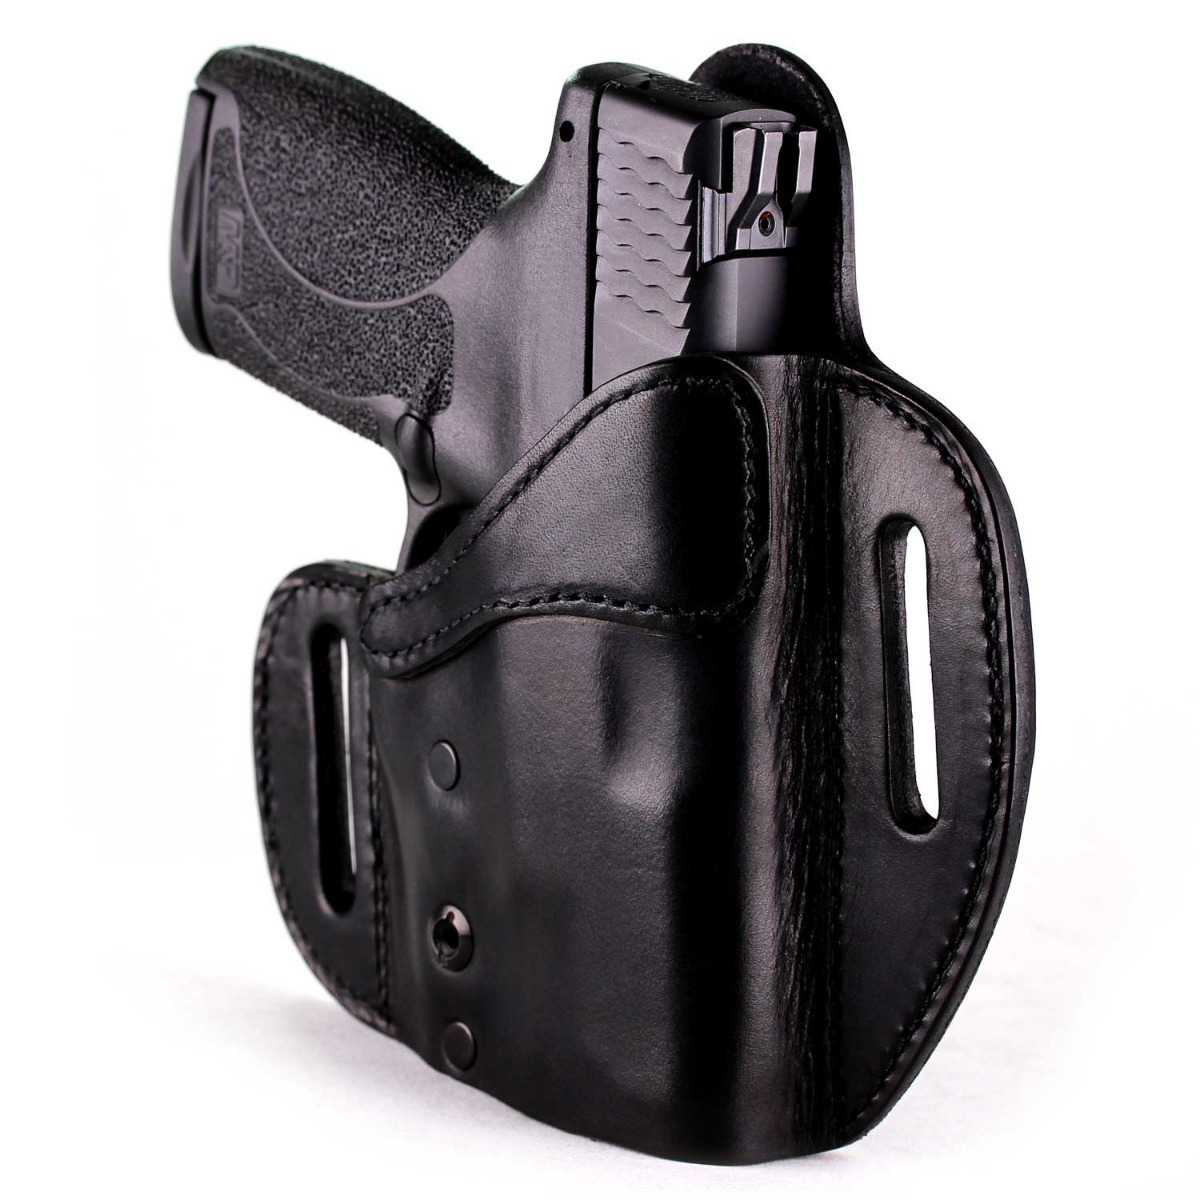 J&J TAURUS TH9C COMPACT OWB BELT CARRY FORMED PREMIUM LEATHER HOLSTER 